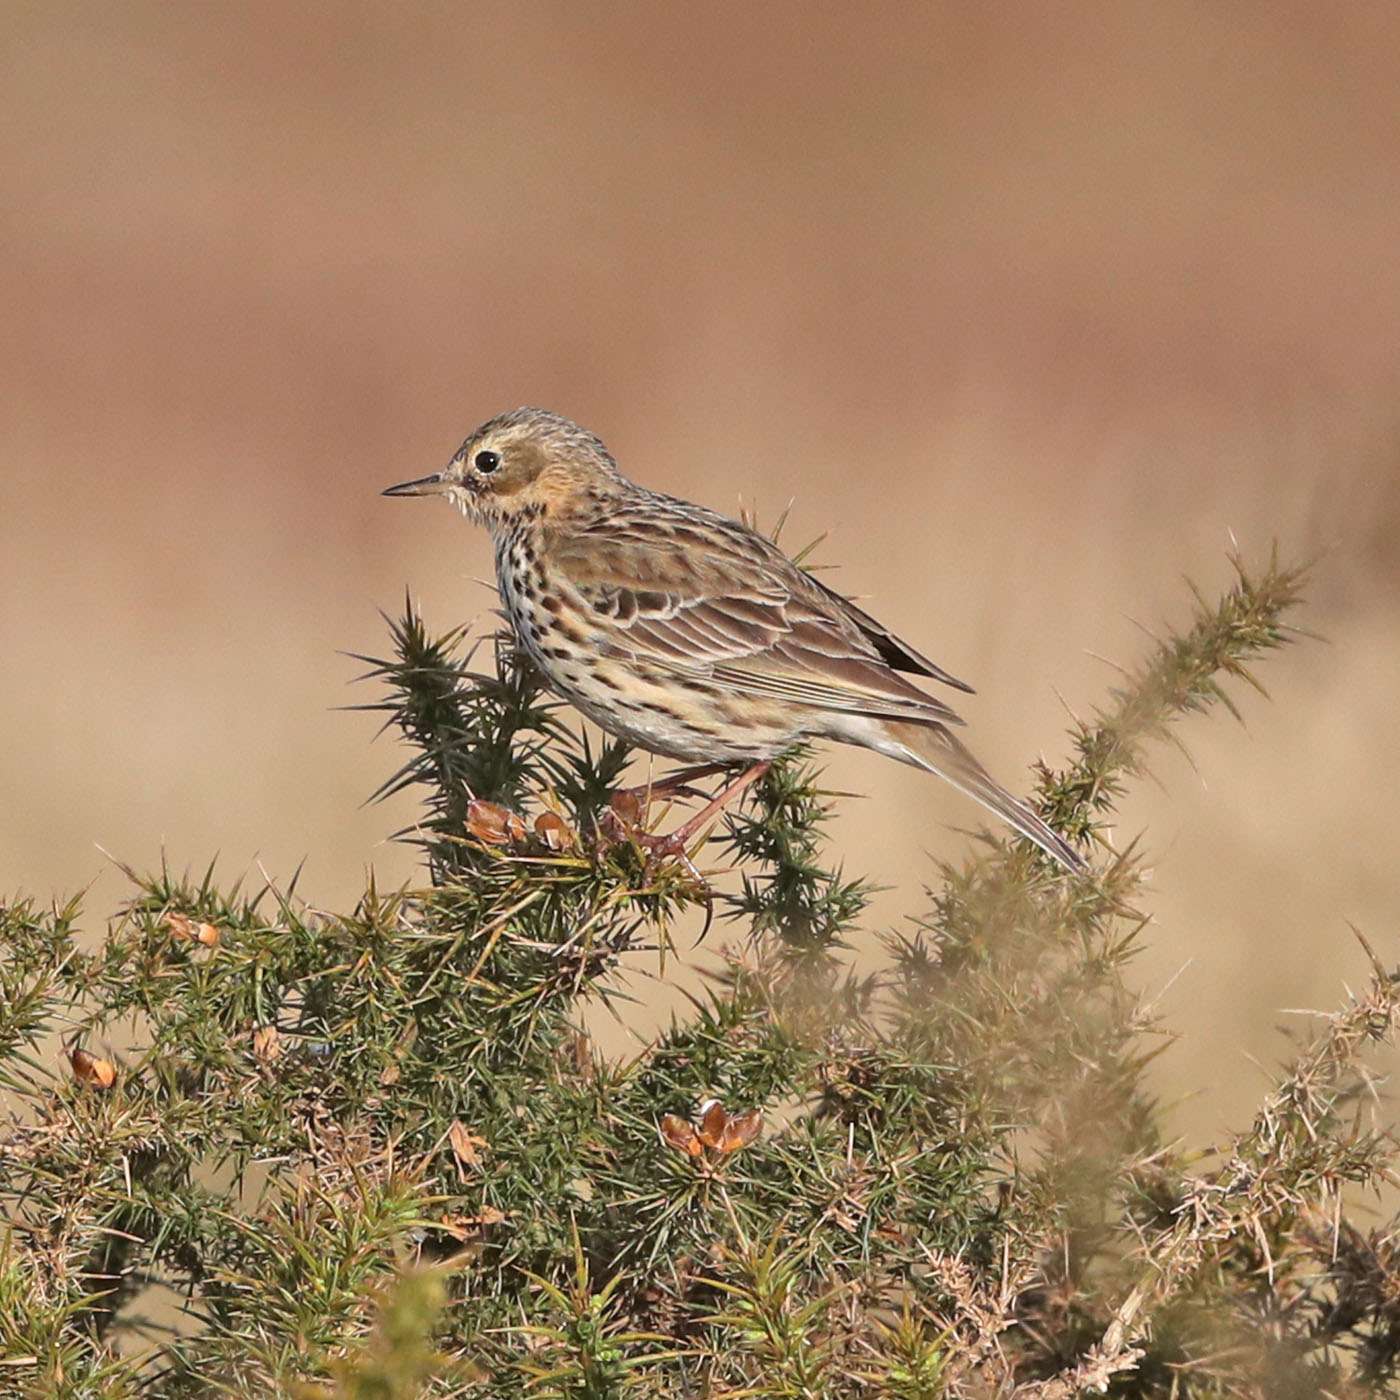 Meadow Pipit by Steve Hopper at South Brent